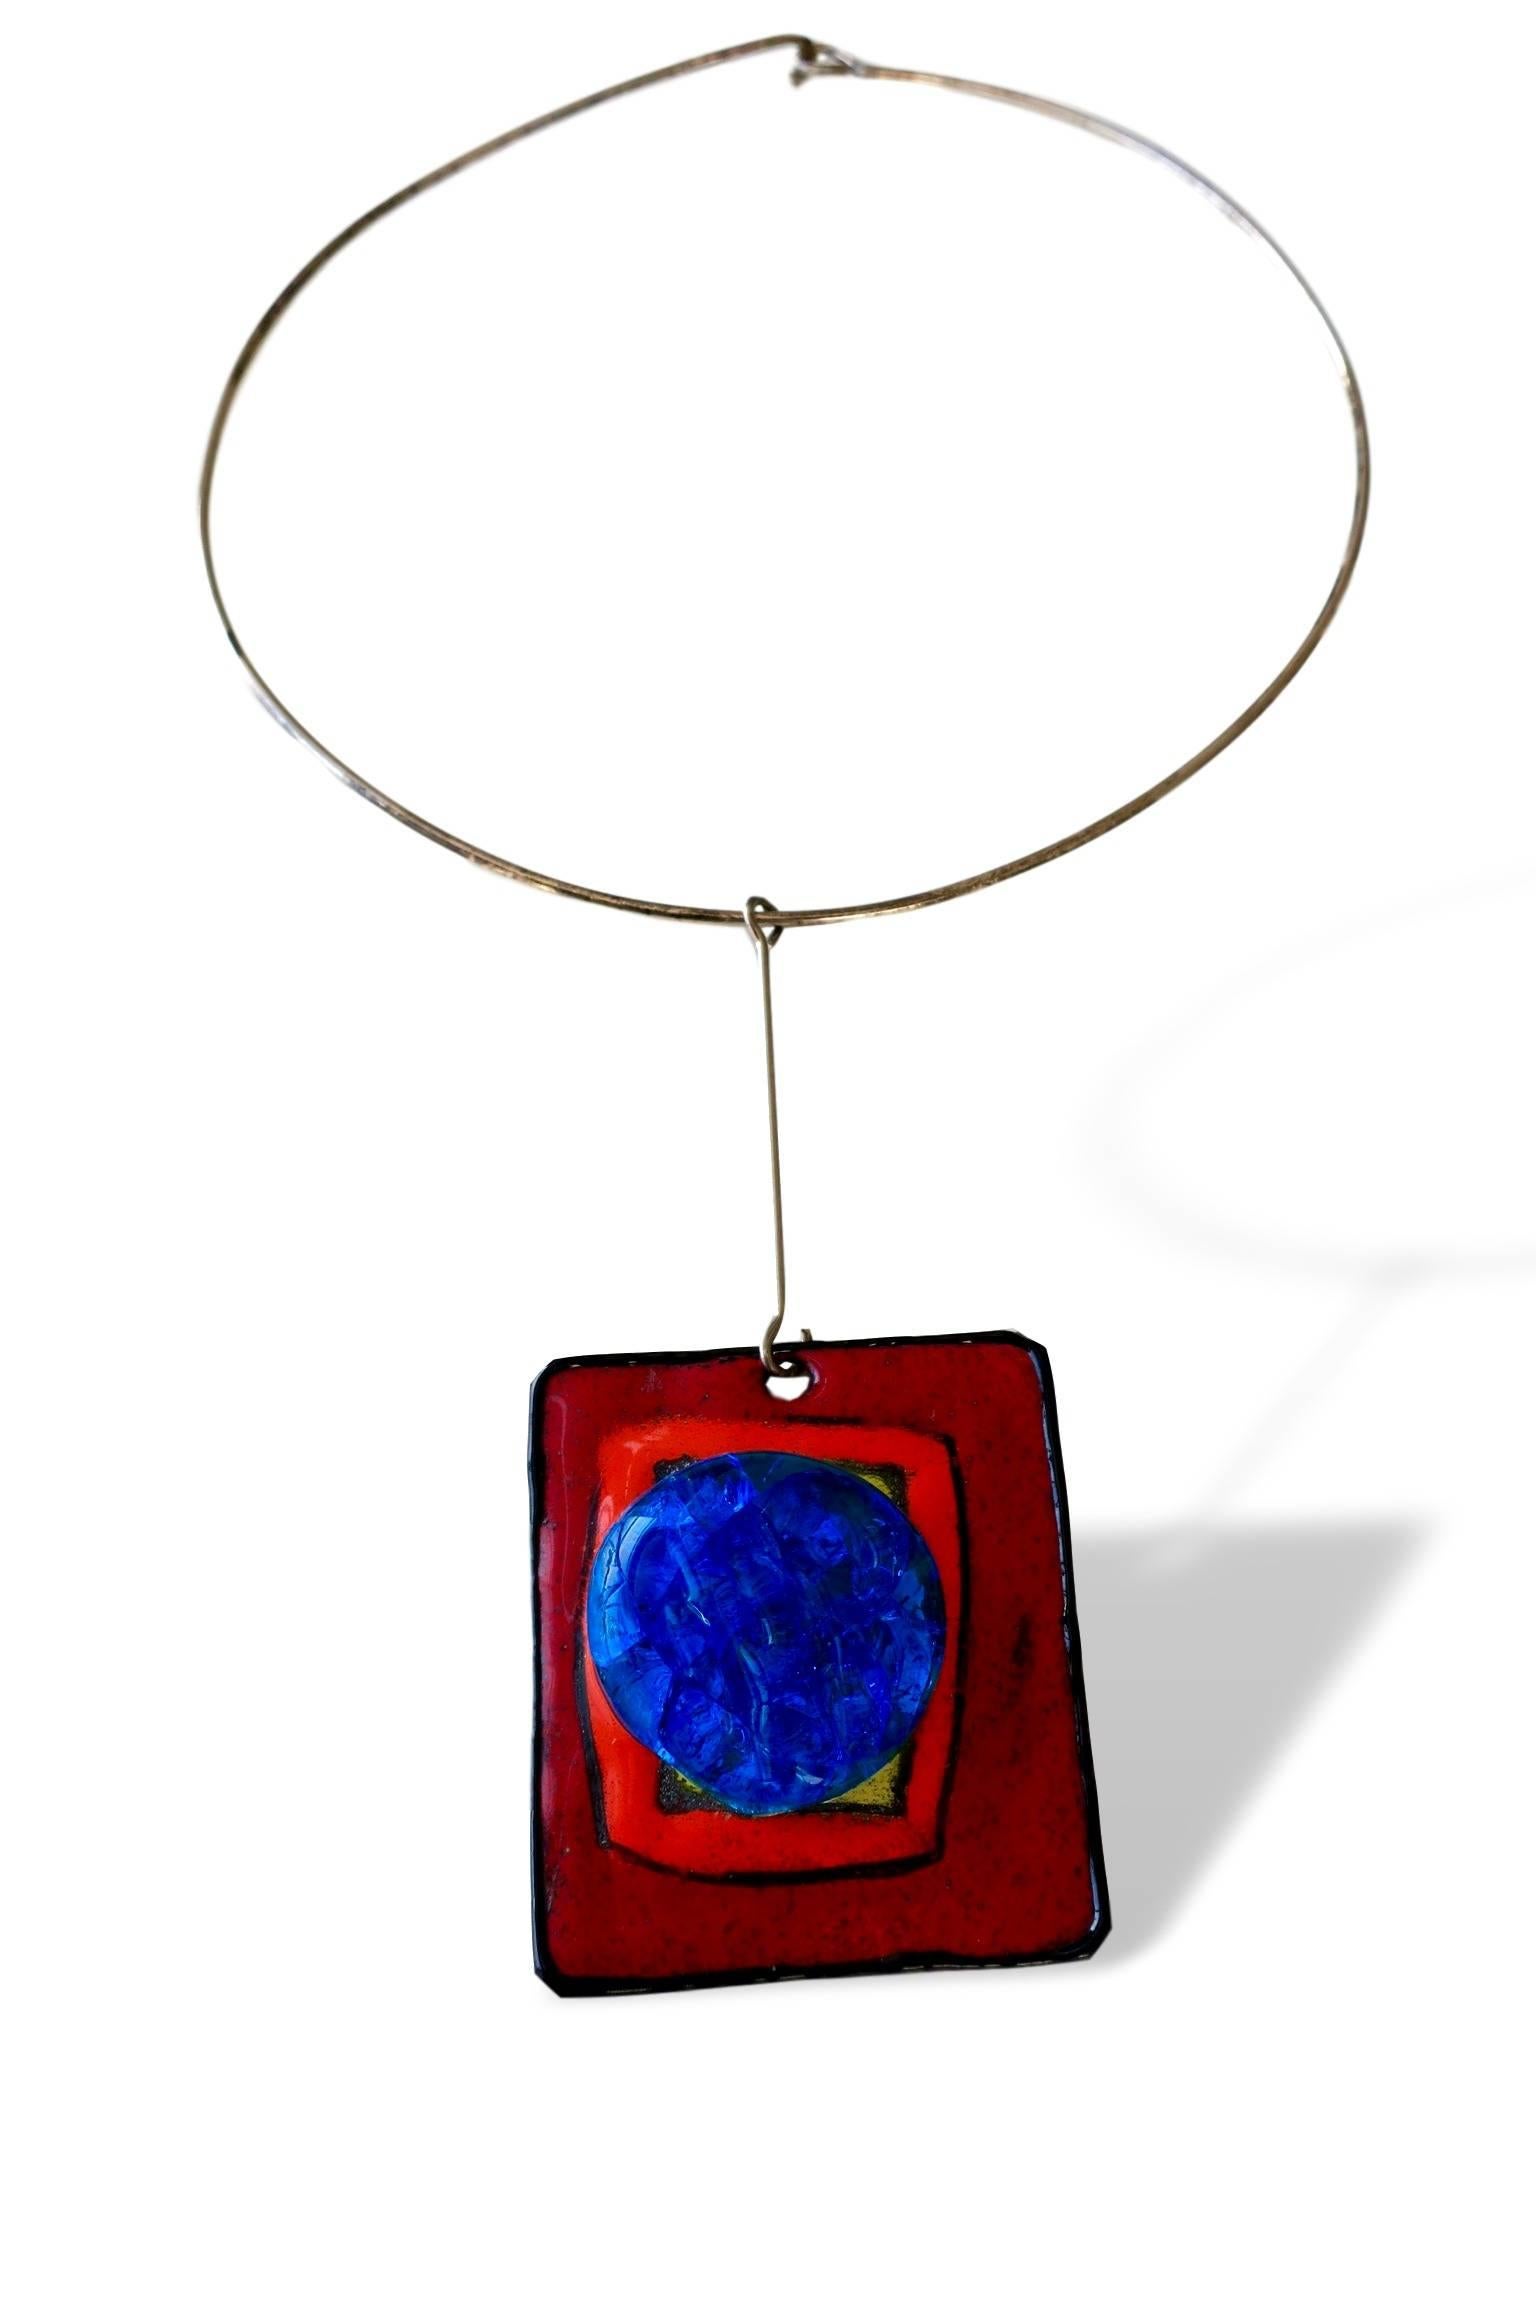 Modernist Pierre Cardin Silver Enamel and Glass Pendant Necklace, French, circa 1965 For Sale